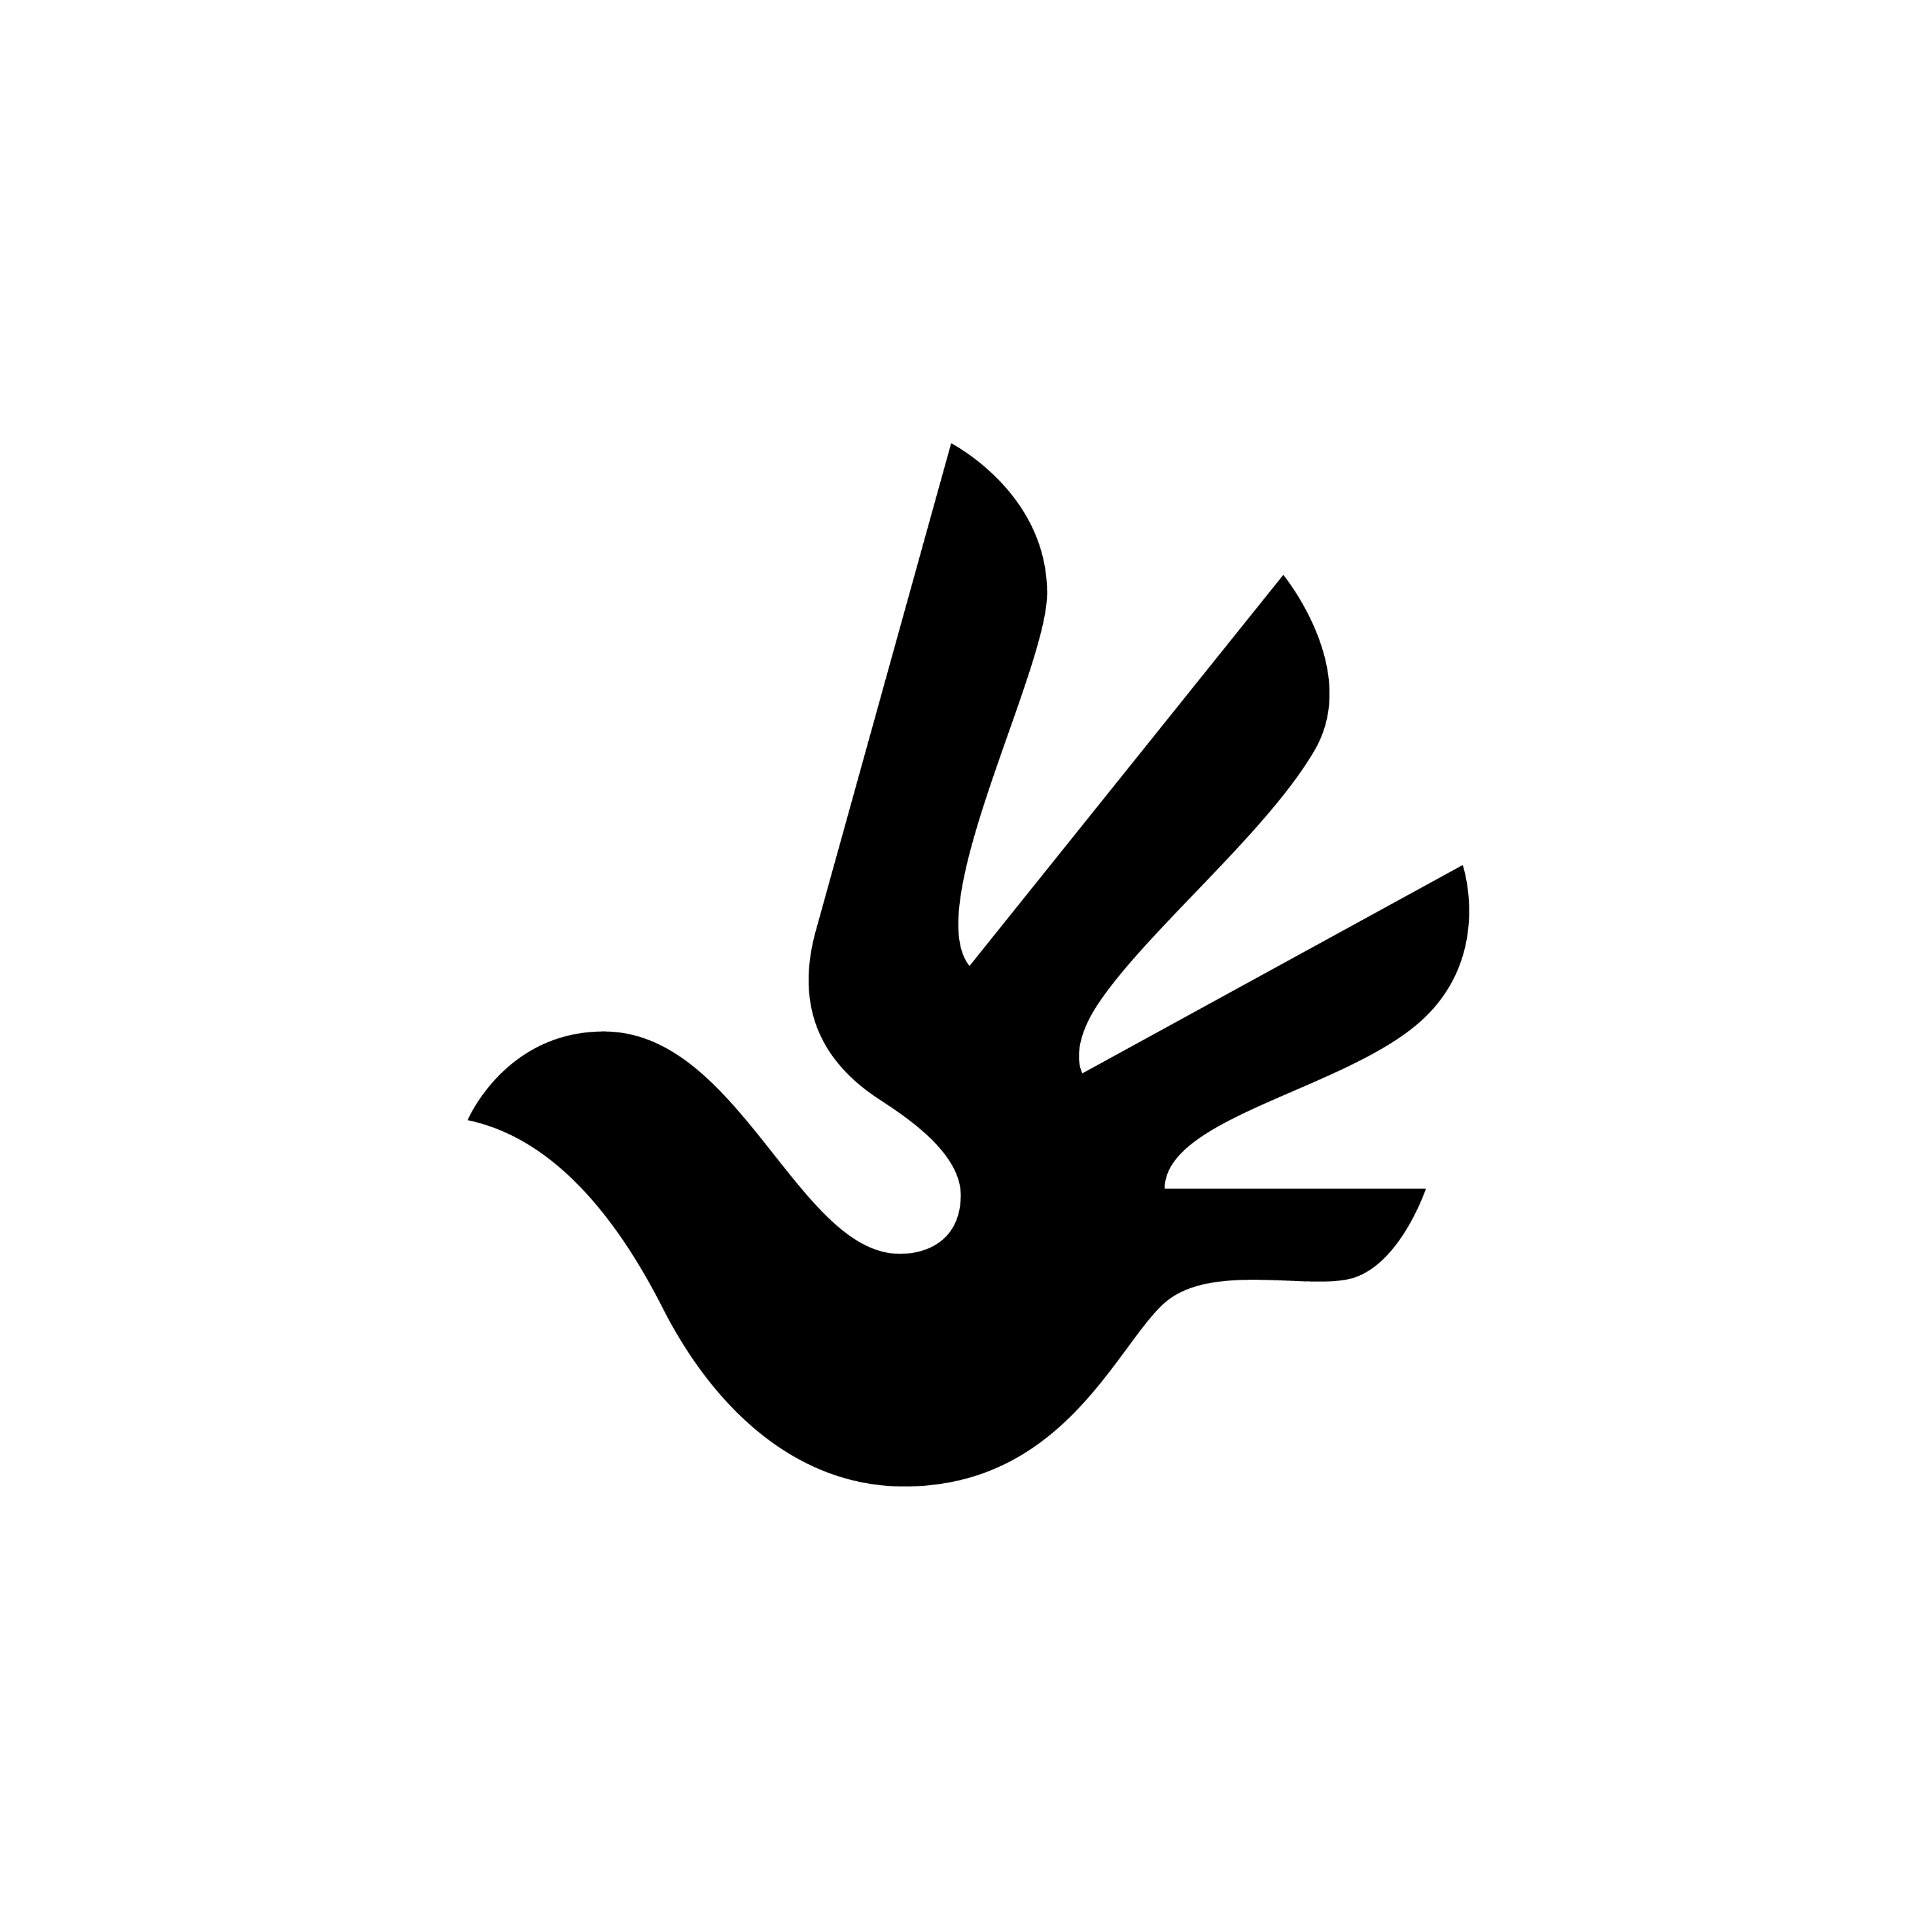 With a White B Logo - Downloads | The Universal Logo For Human Rights